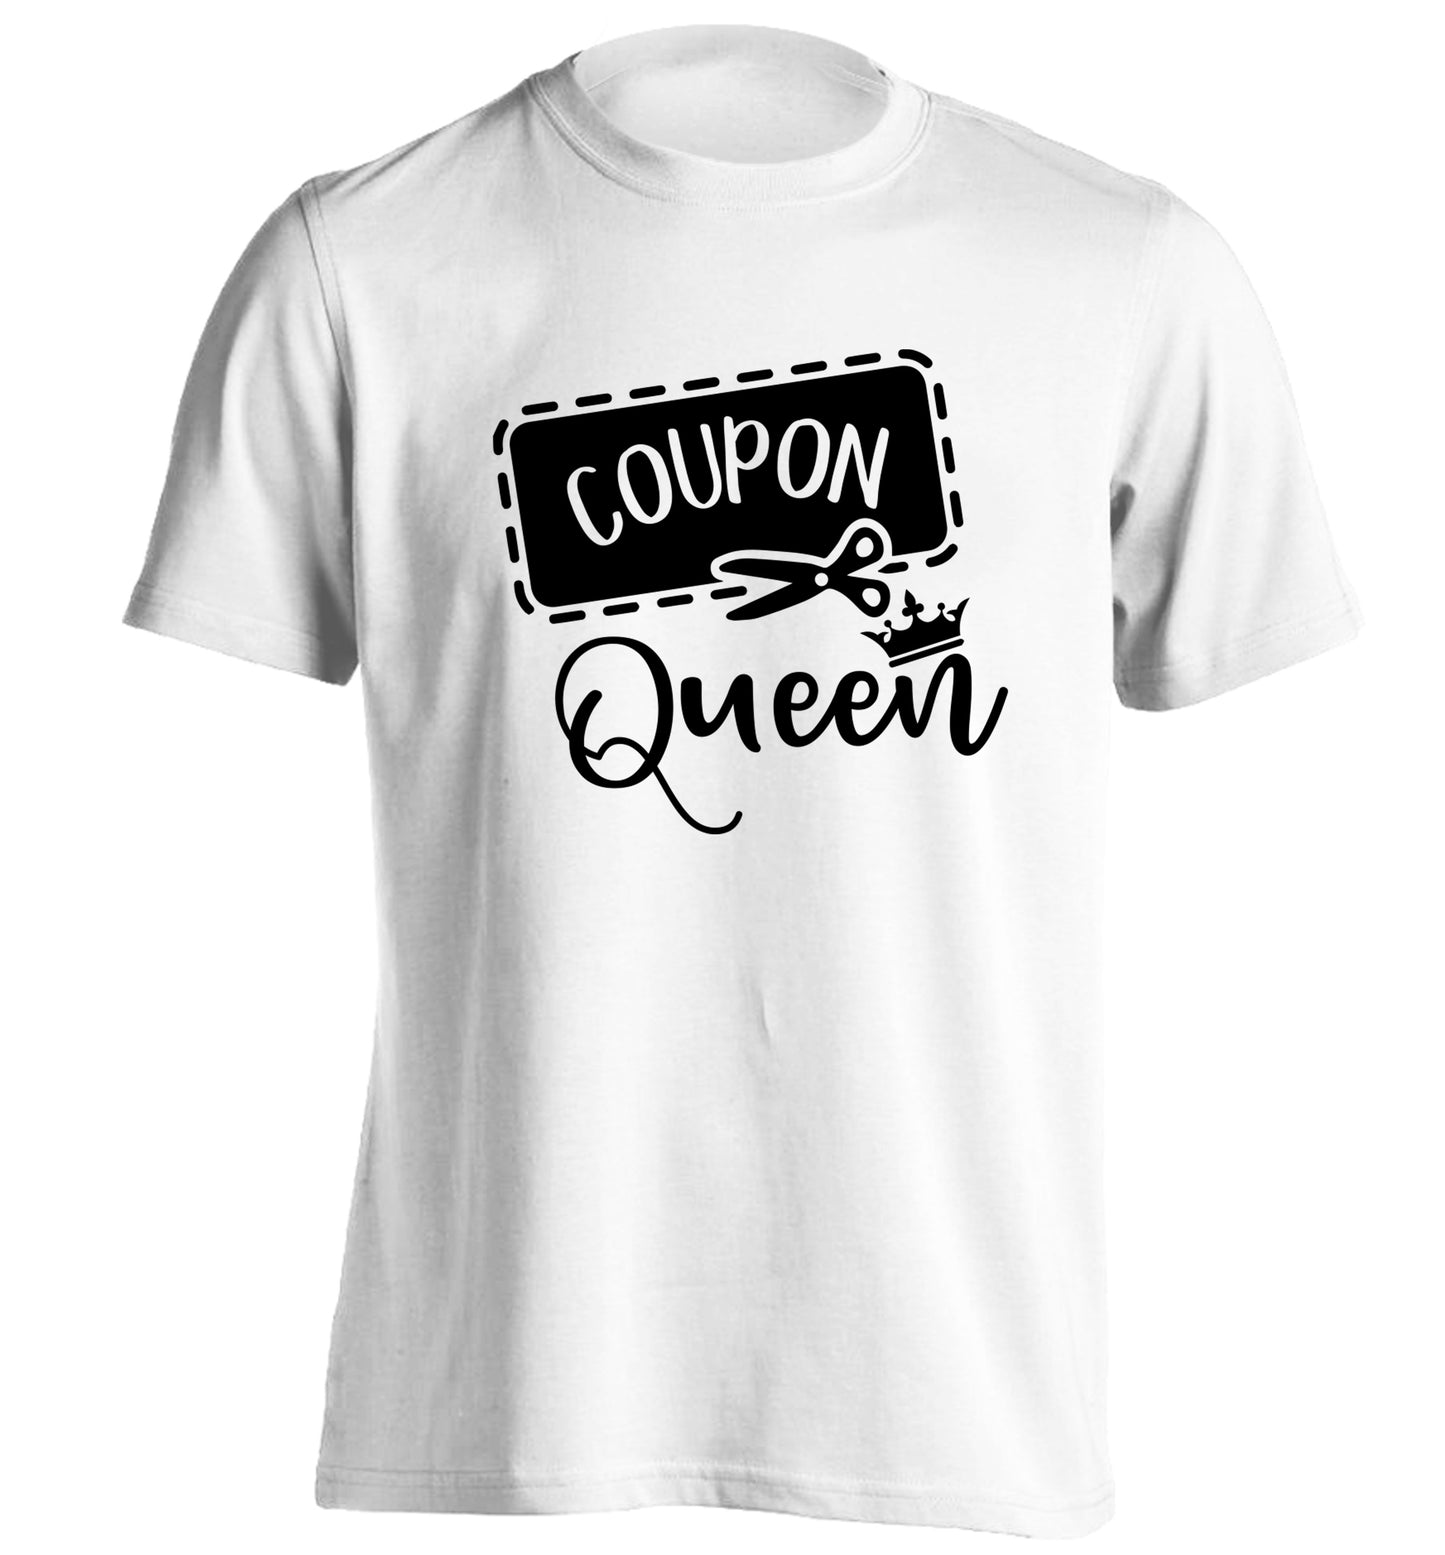 Coupon Queen adults unisex white Tshirt 2XL